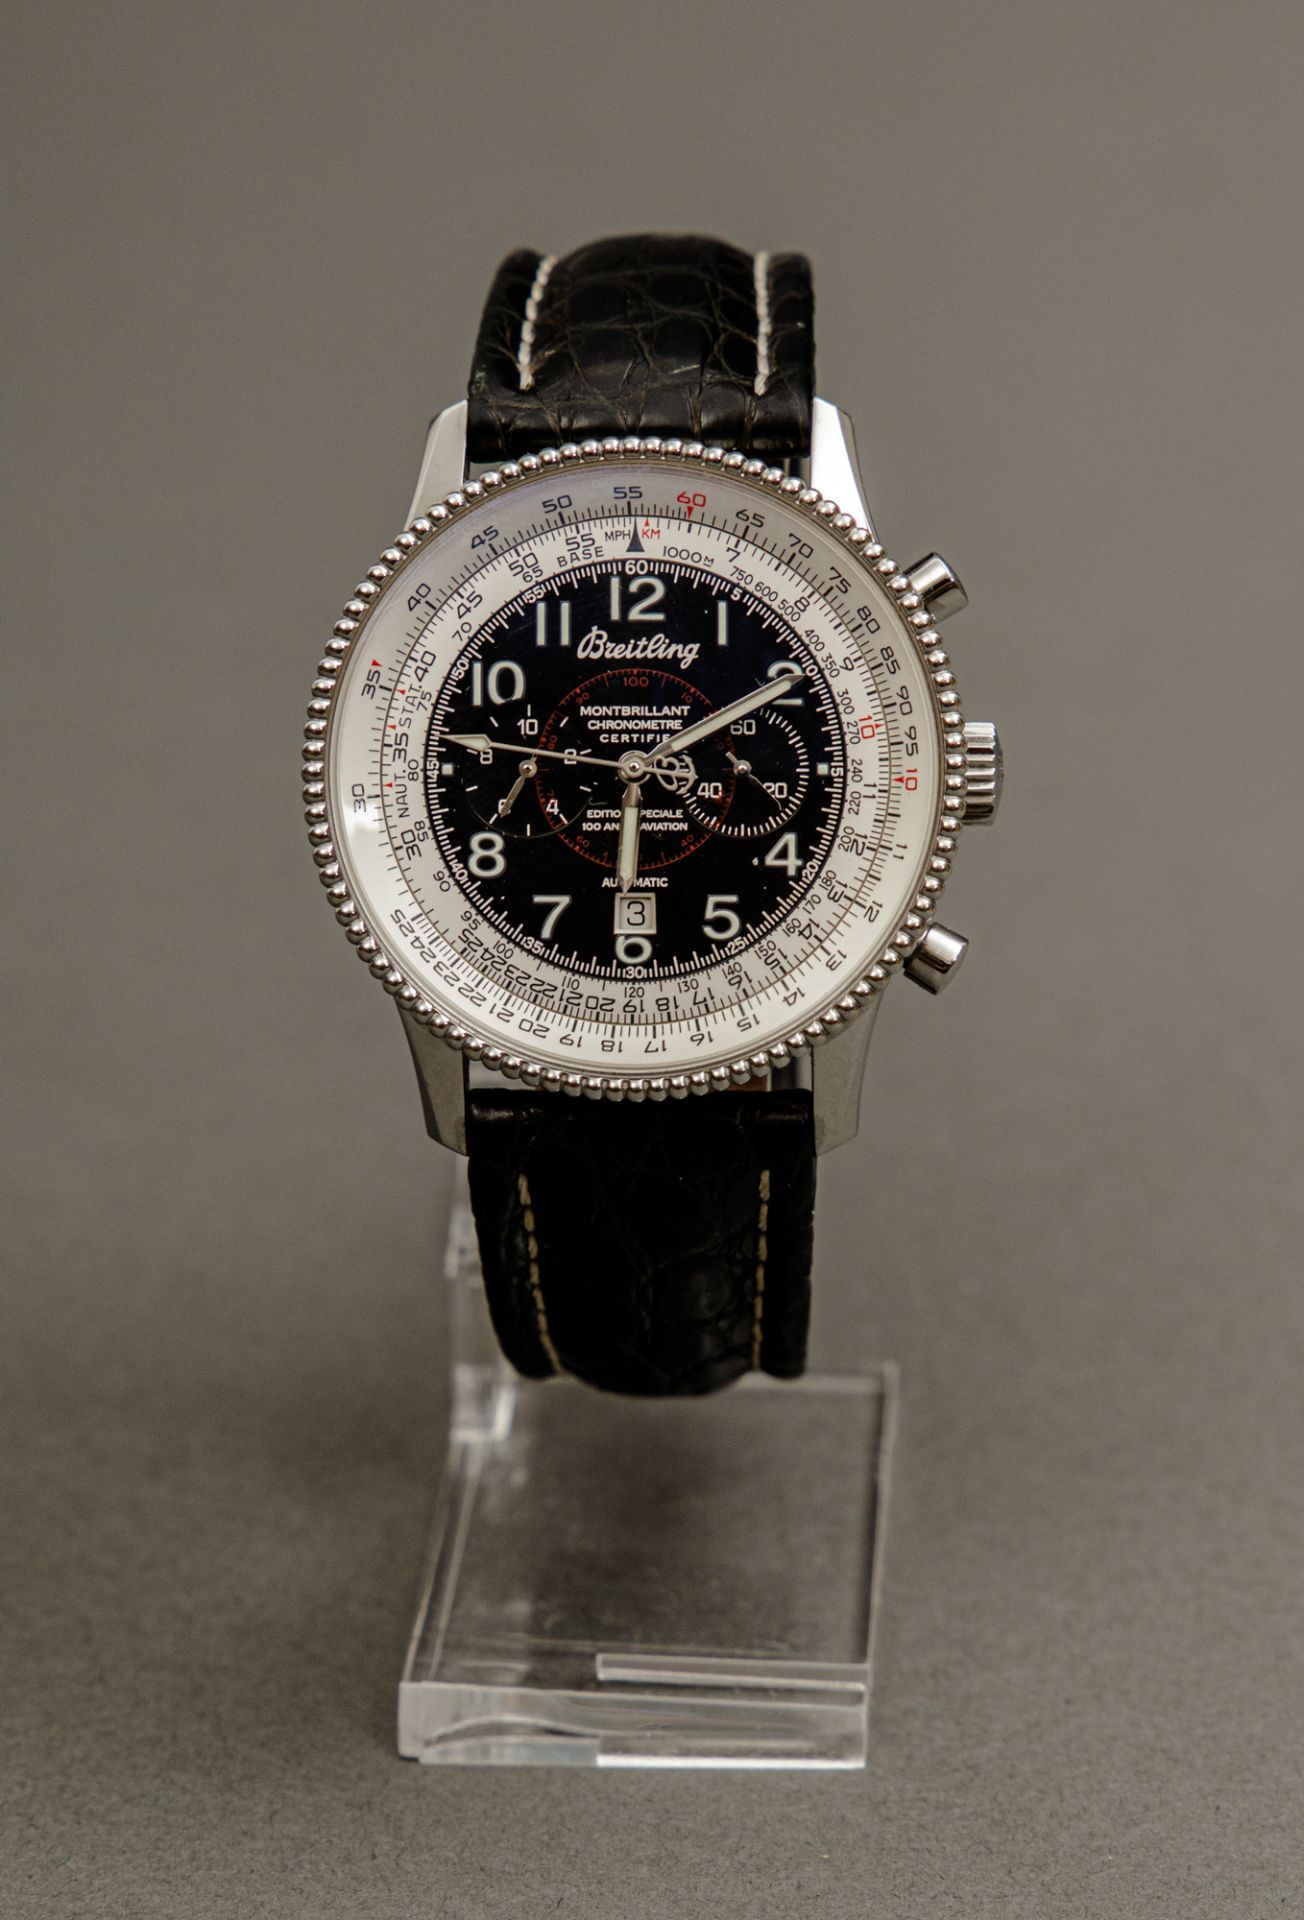 Breitling Navitimer Montbrillant Edition Speciale 100 ans d'Aviation 1903-2003